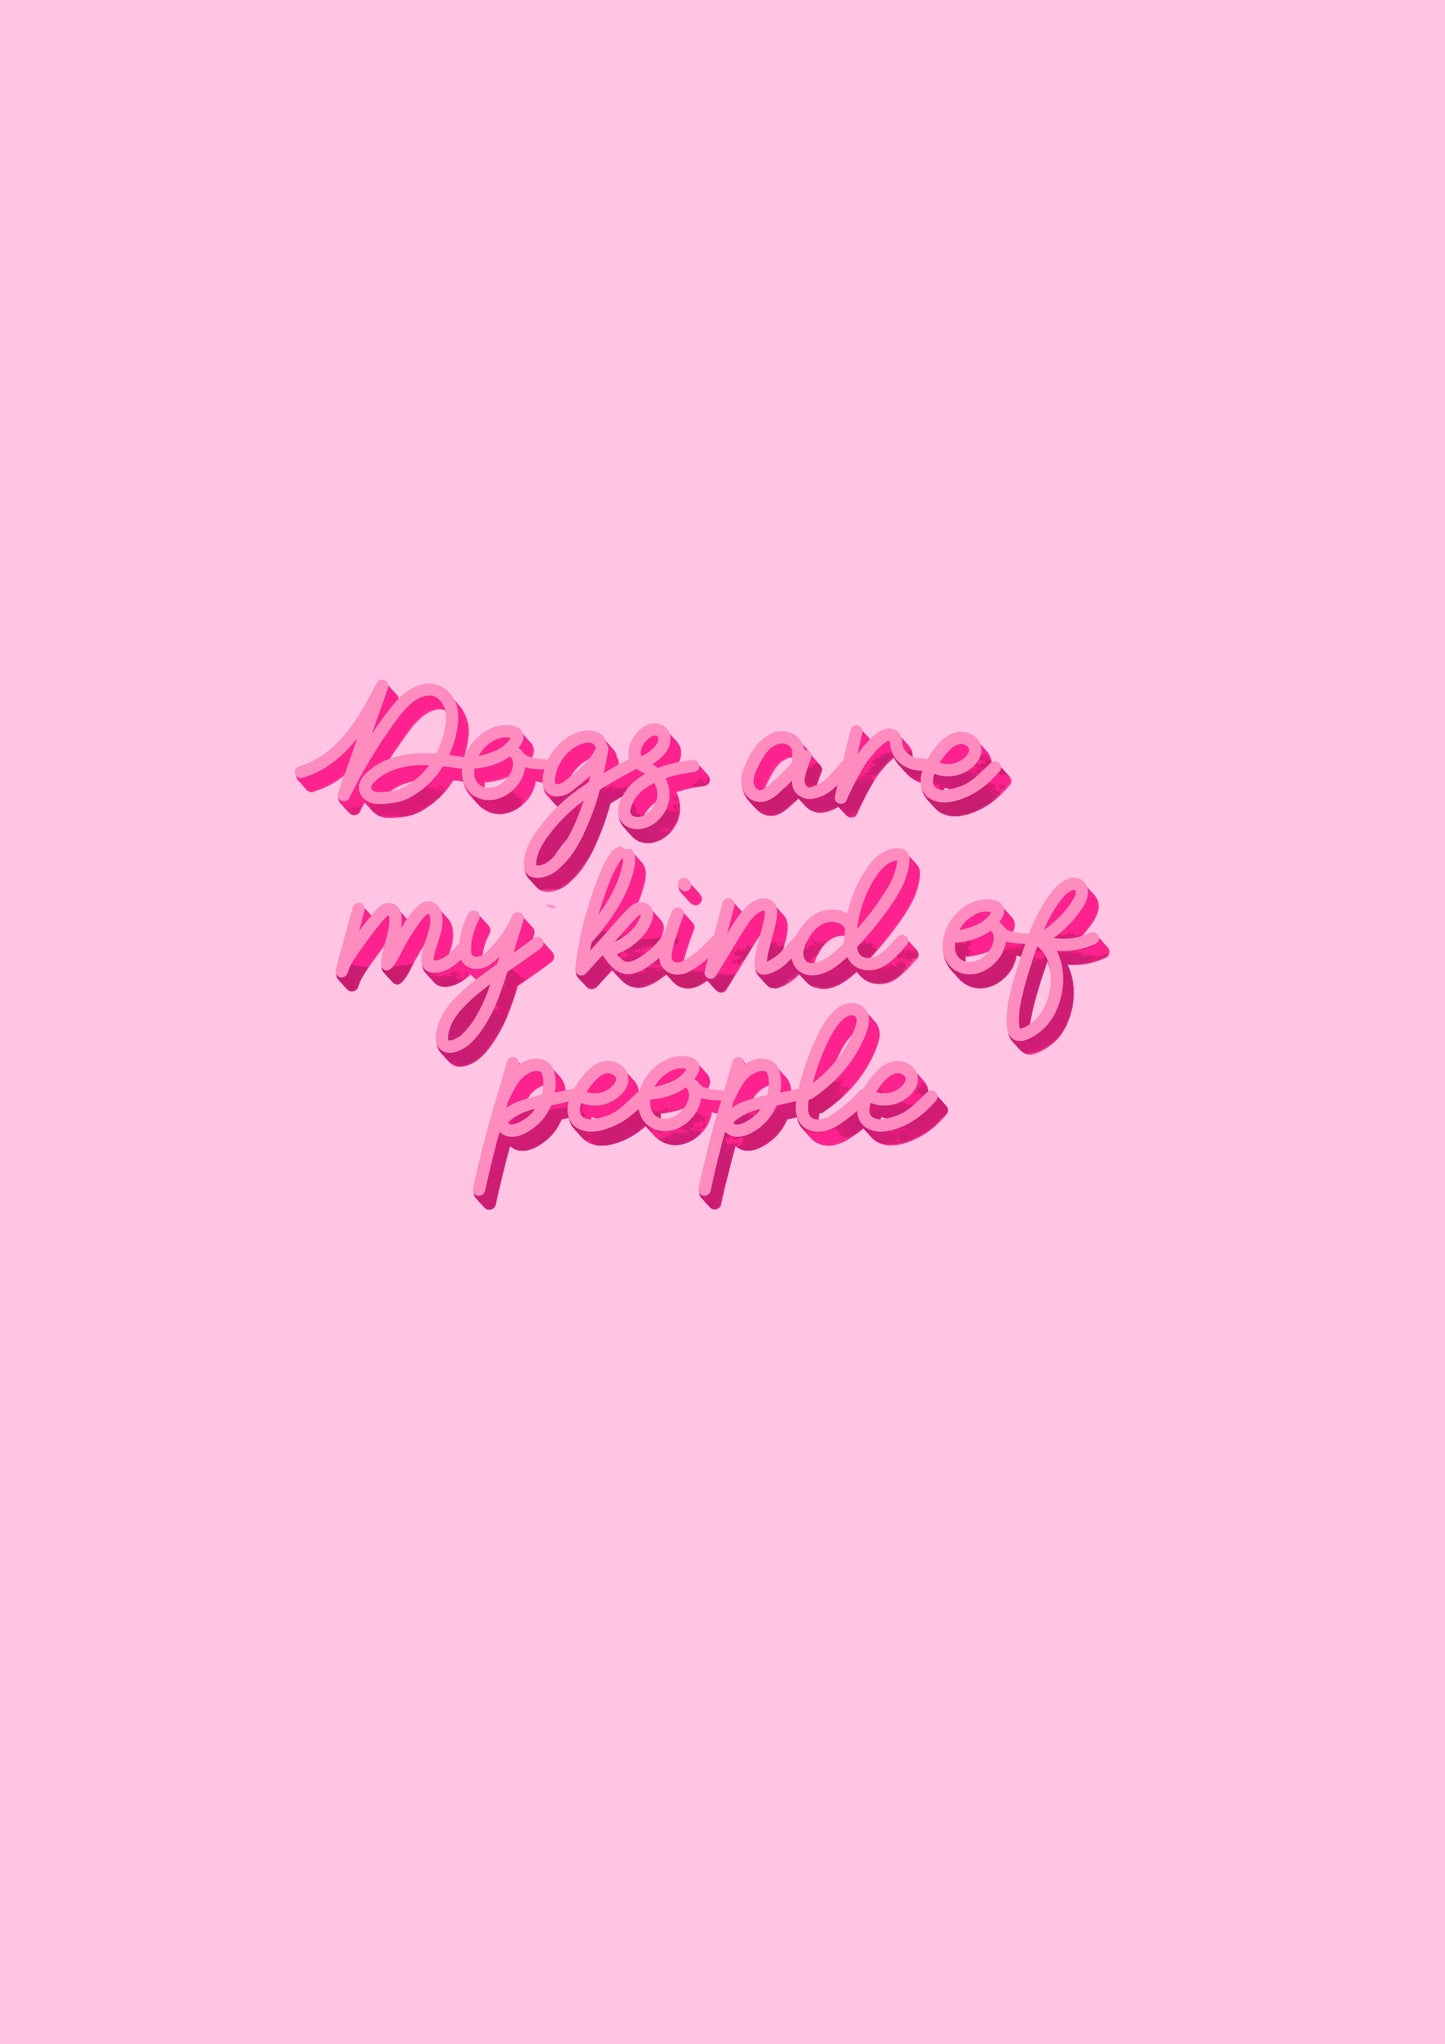 Dogs are my kind of people typography wall art quote print